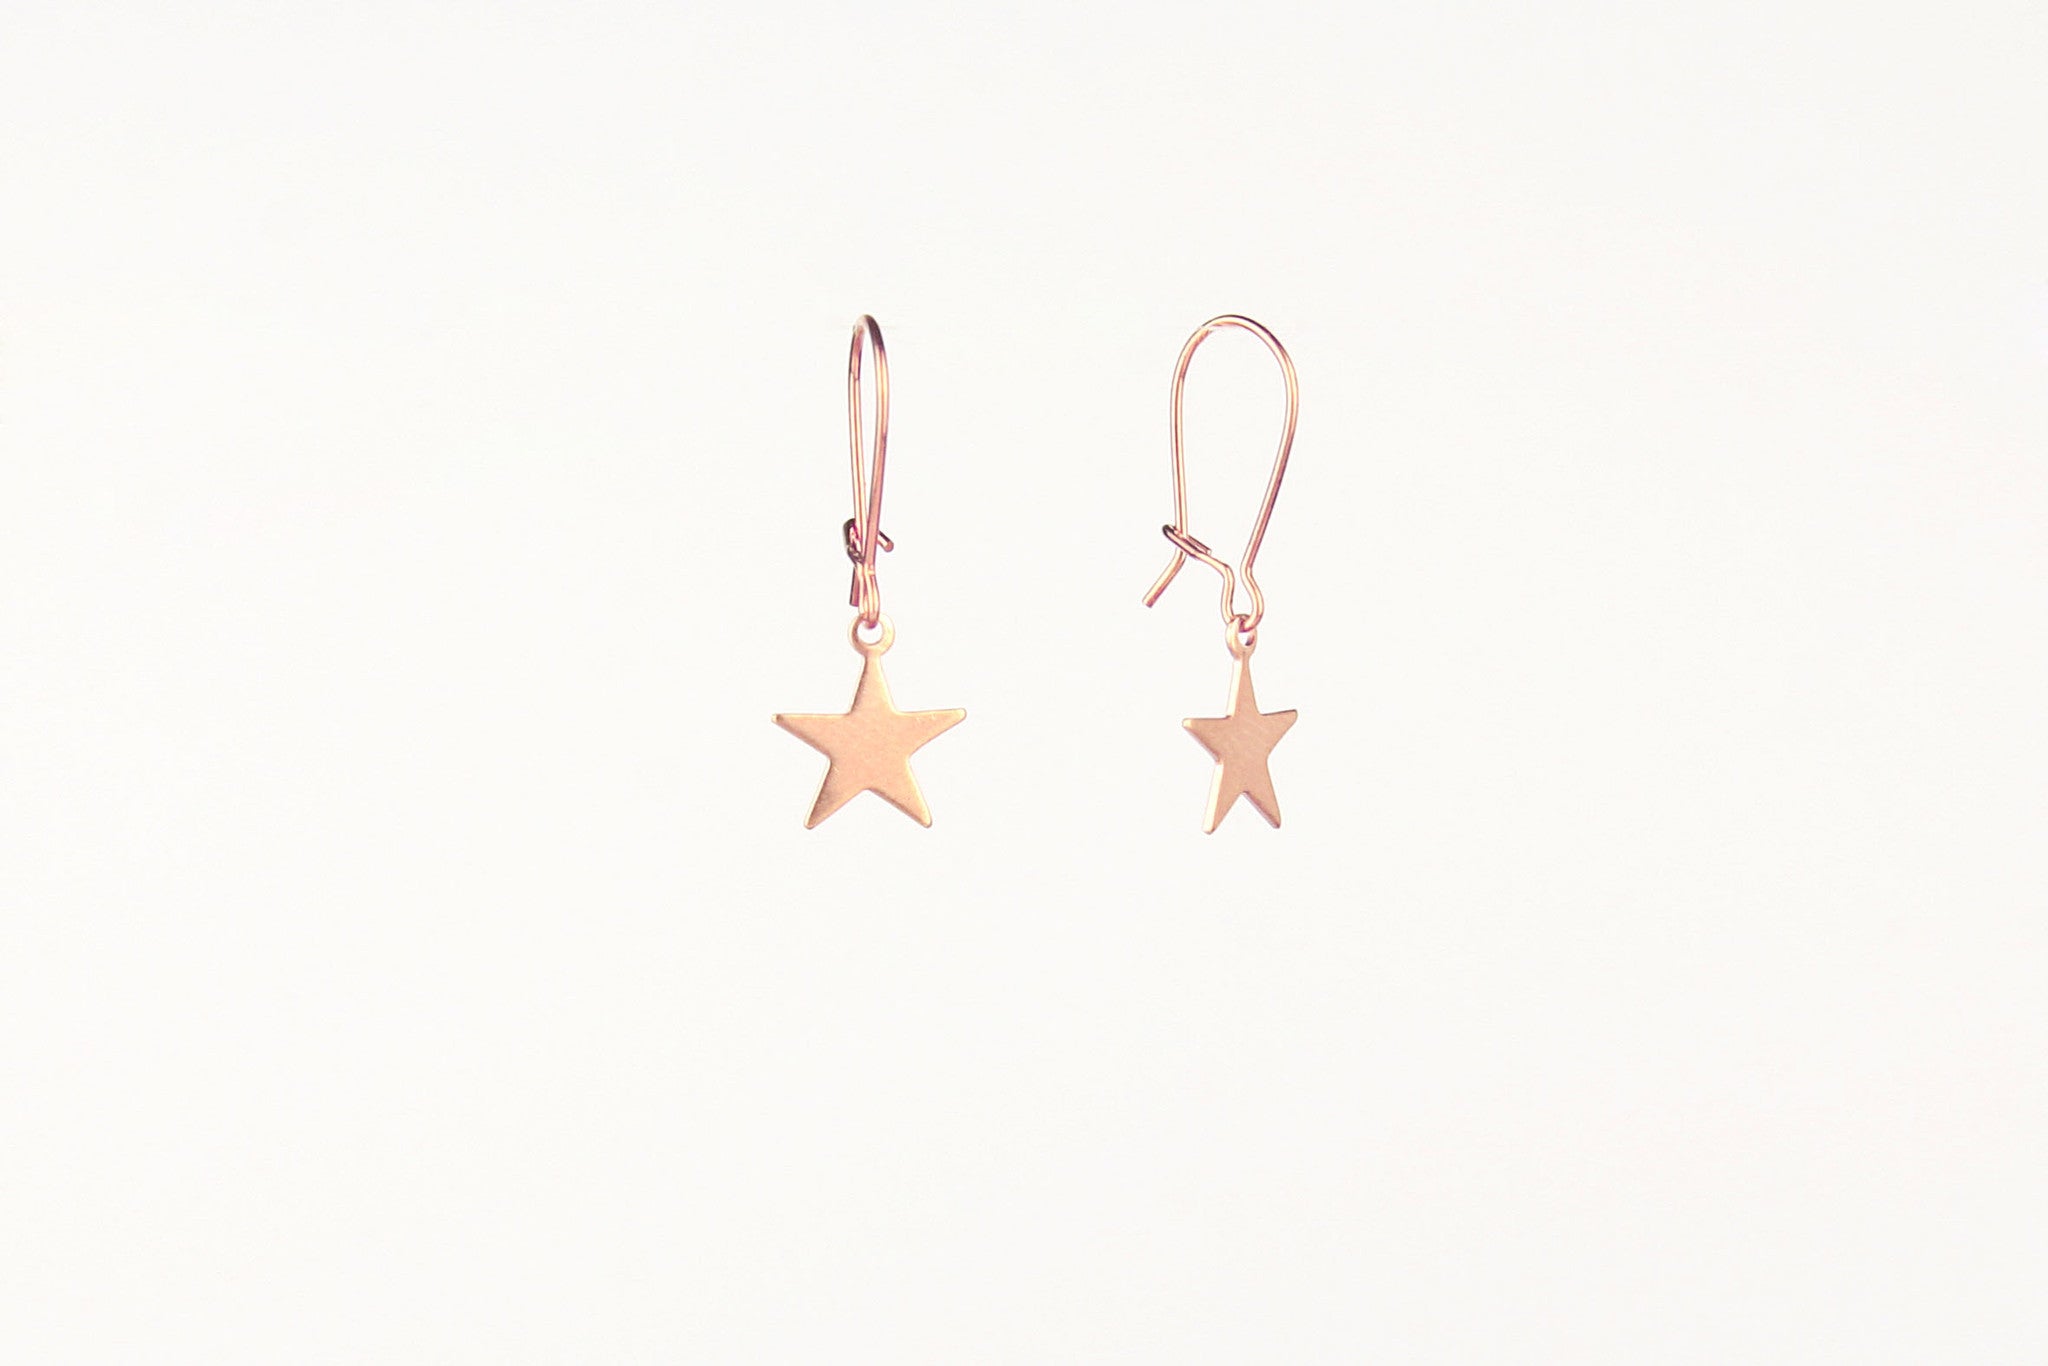 jewelberry ohrringe earrings plain star red gold plated sterling silver fine jewelry handmade with love fairtrade